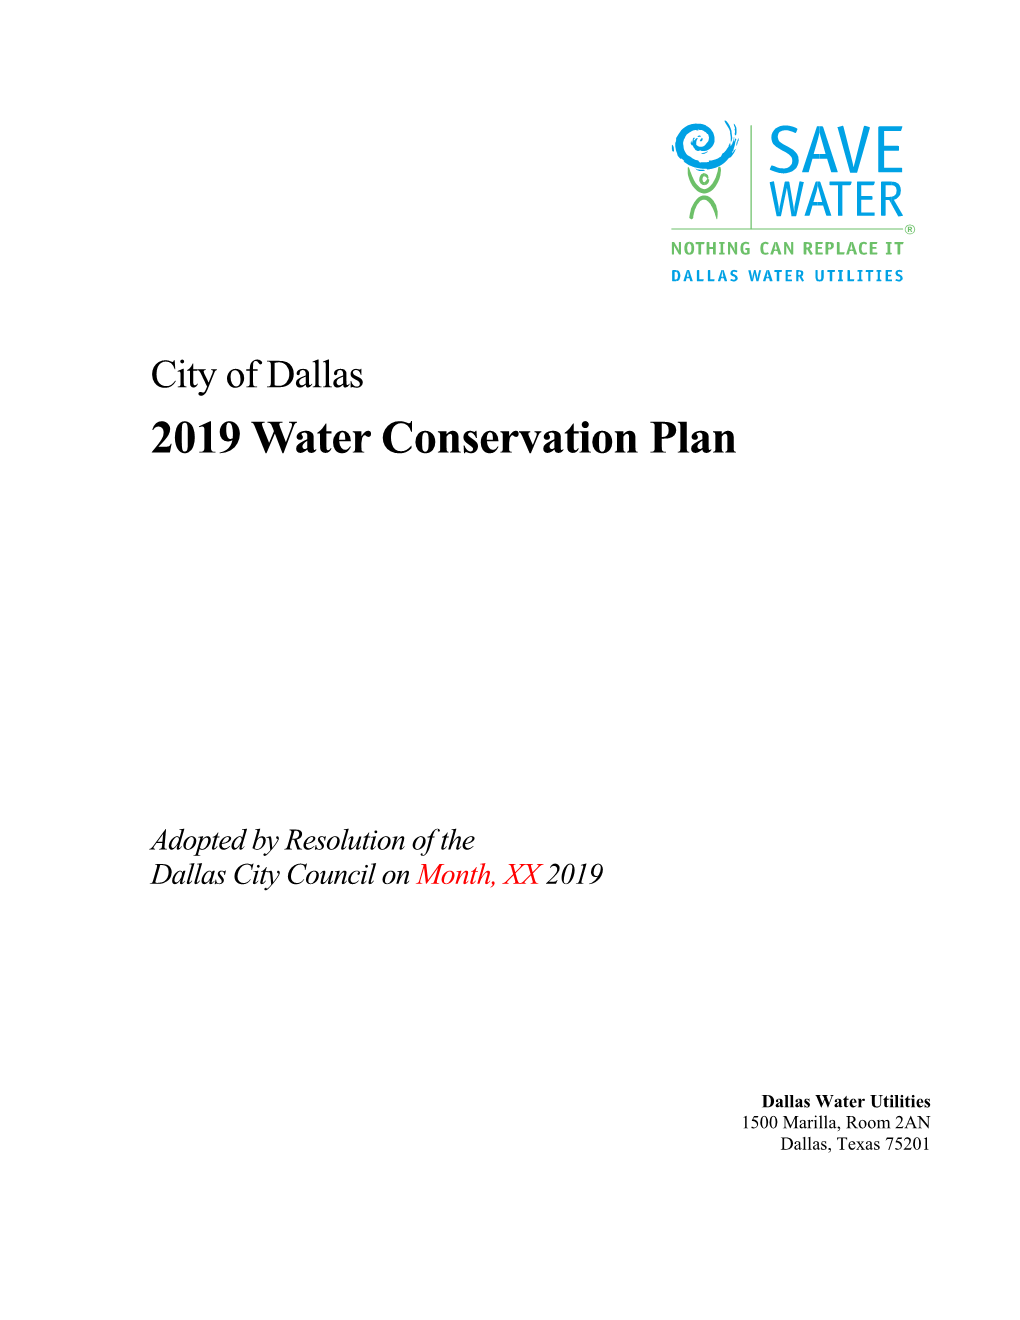 City of Dallas 2019 Water Conservation Plan